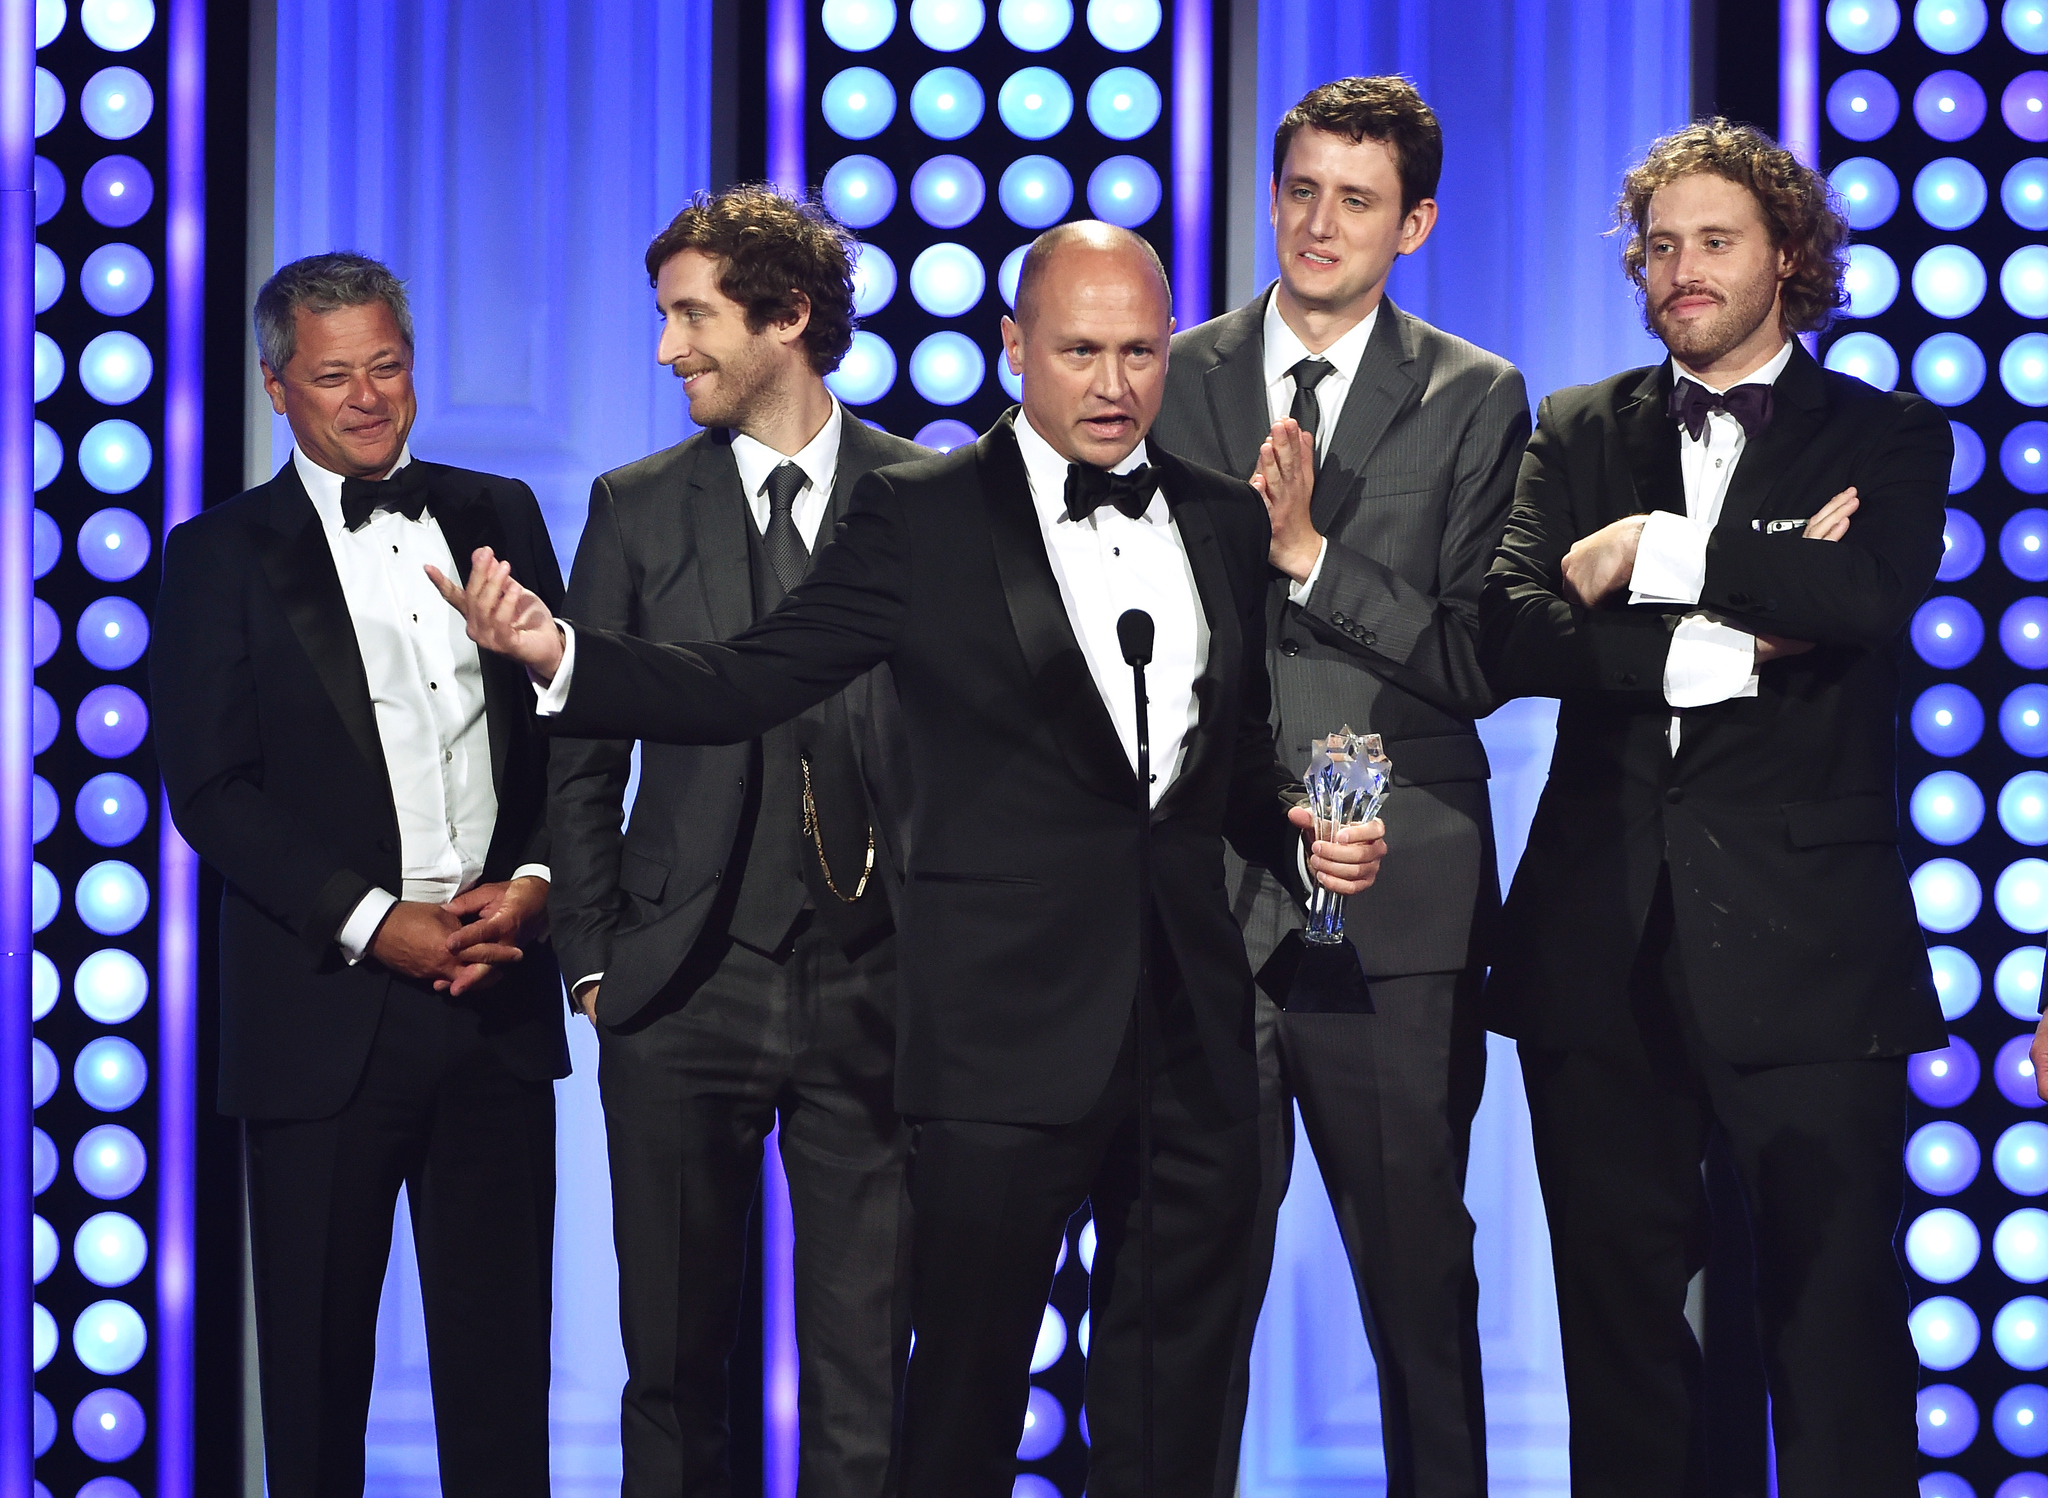 Mike Judge, Michael Rotenberg, Zach Woods, T.J. Miller and Thomas Middleditch